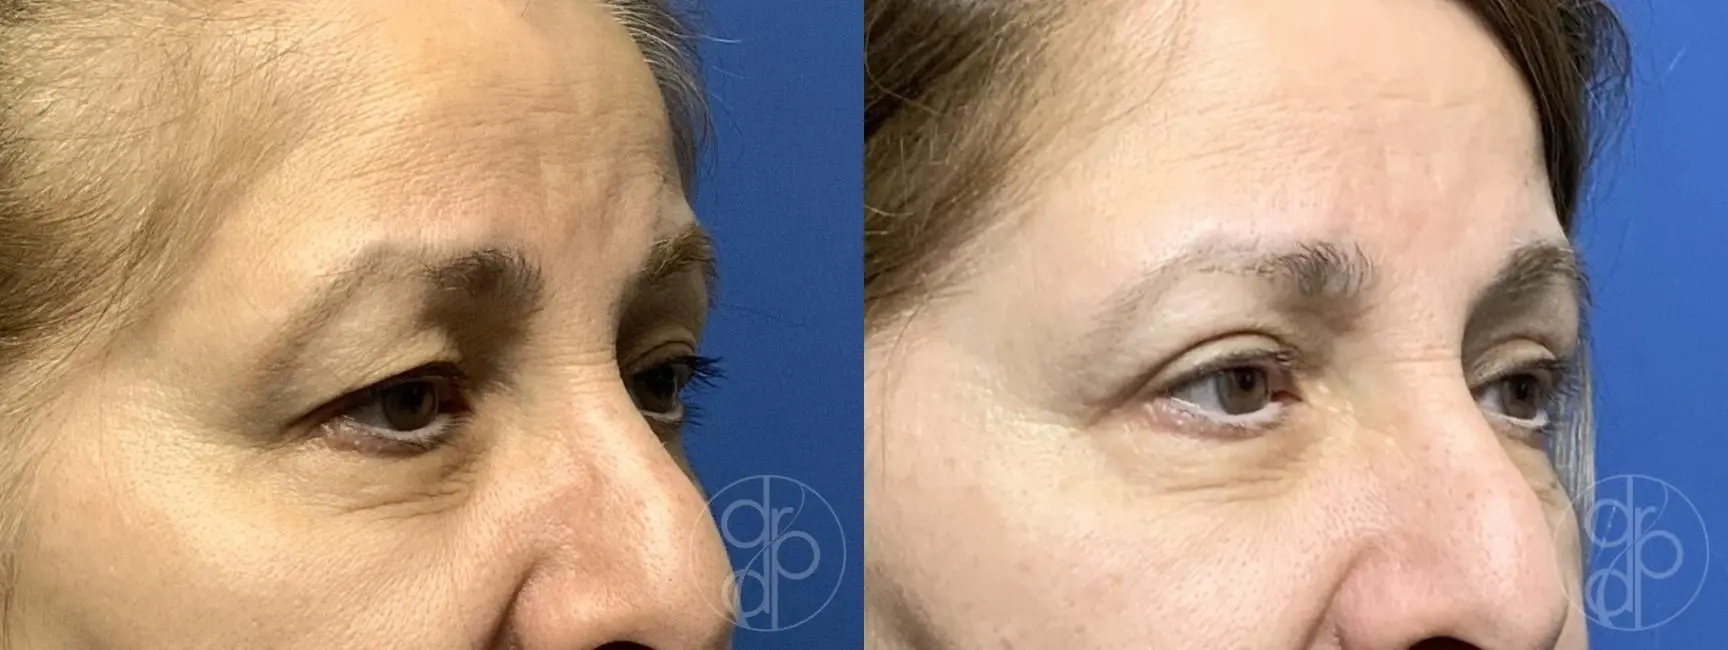 patient 13764 blepharoplasty before and after result - Before and After 2